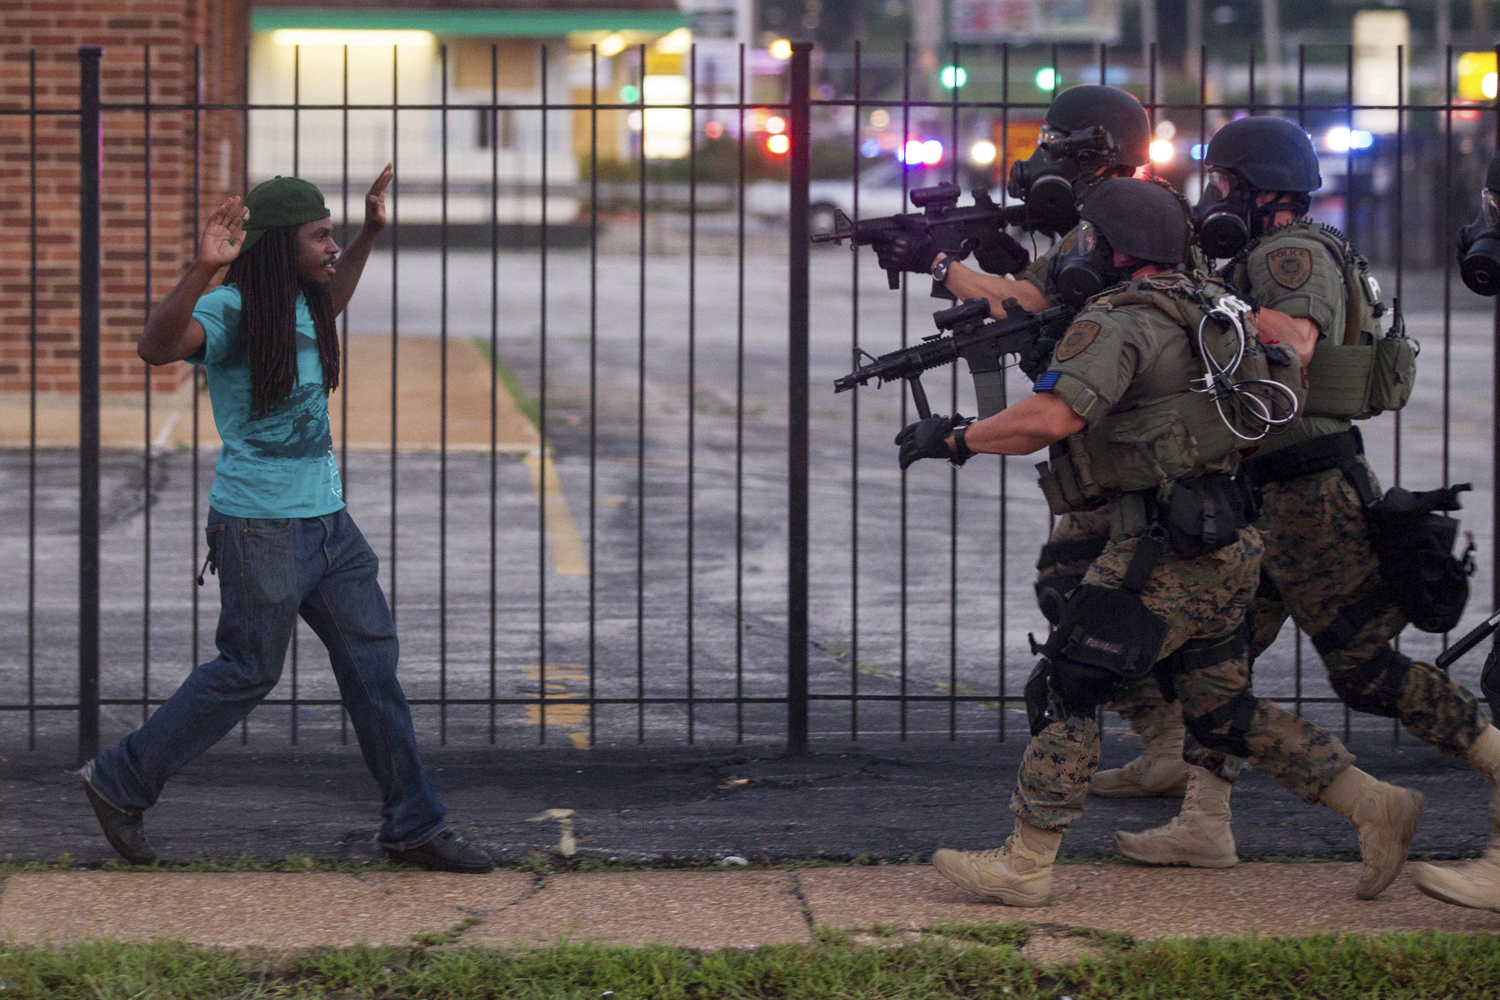 Aug. 11, 2014. A man backs away as law enforcement officials close in on him and eventually detain him during protests over the death of Michael Brown, an unarmed black teenager killed by a police officer, in Ferguson, Mo.